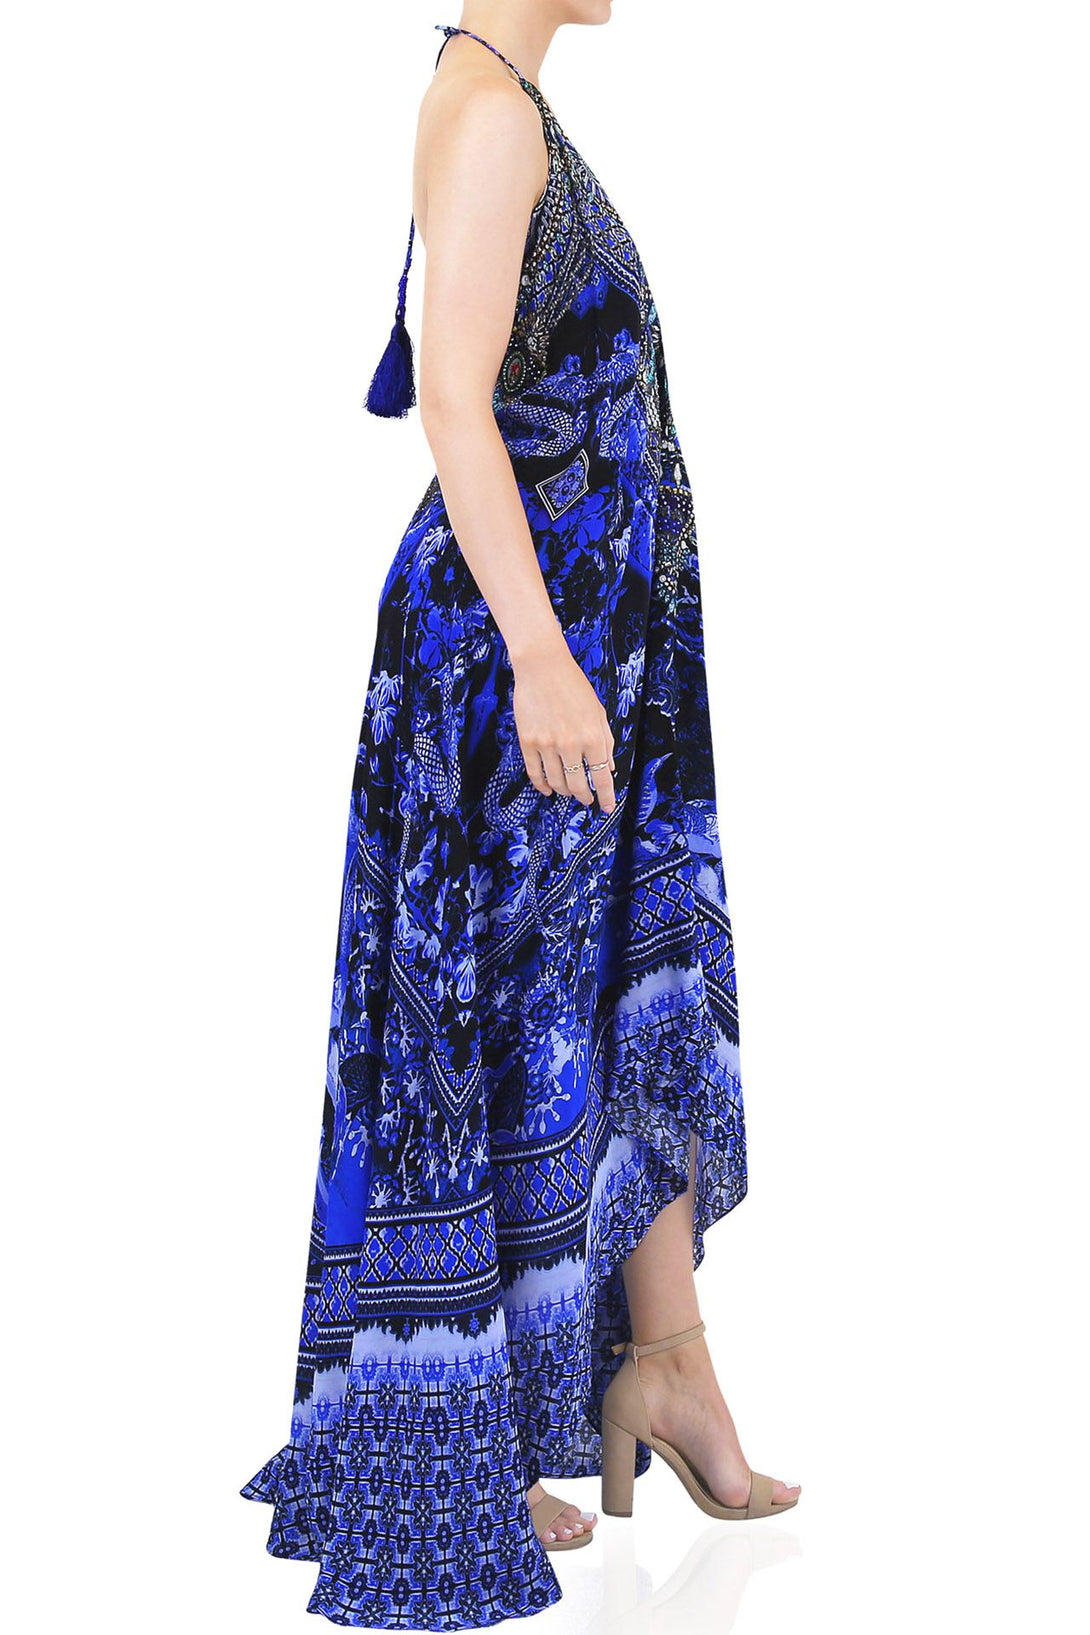  navy blue long dress with sleeves, formal dresses for women, Shahida Parides, plunging neckline cocktail dress,